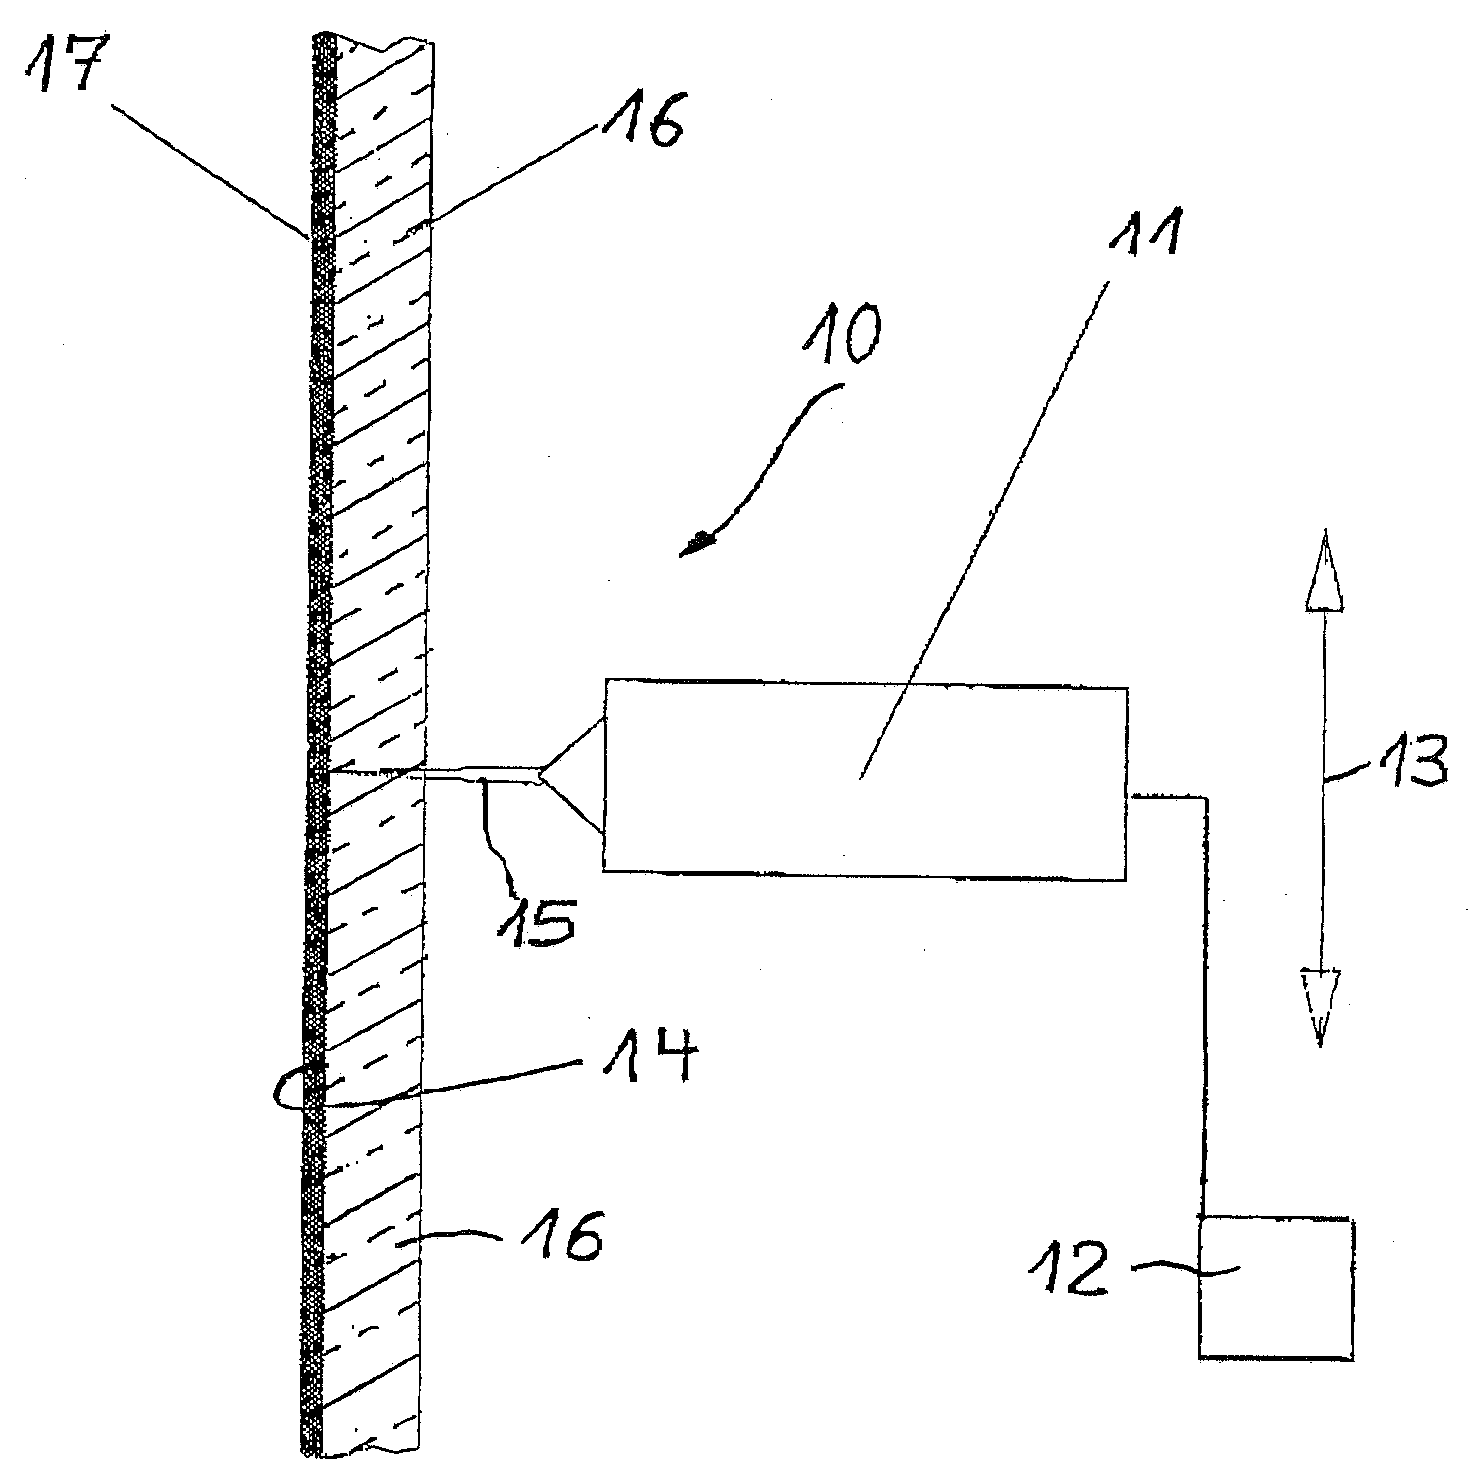 Method for generating color information, such as motifs, on a substrate made of glass in particular